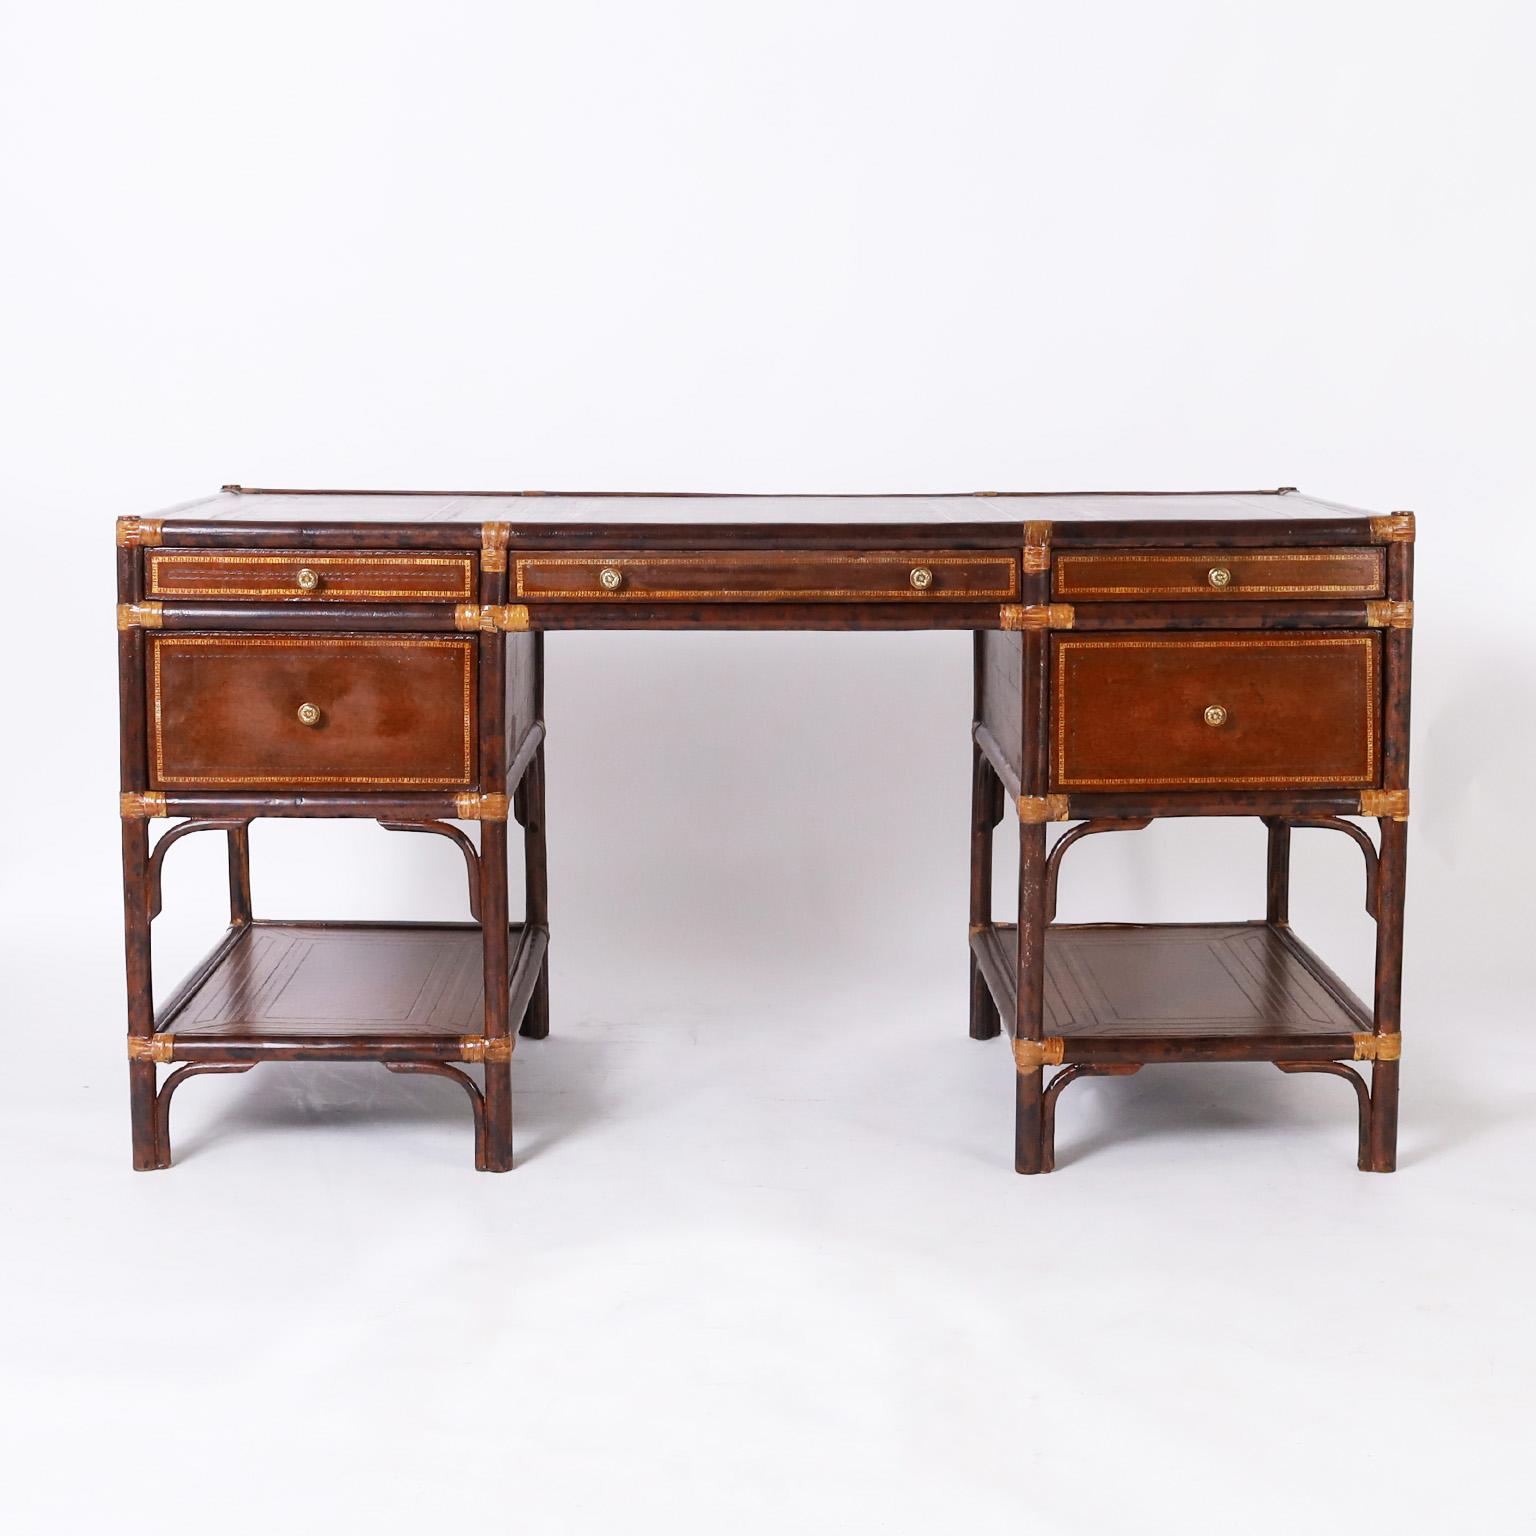 Handsome midcentury British Colonial style desk having a tooled and gilt decorated brown leather top, a five drawer case with tooled leather all around, brass hardware, and two leather lined lower tiers.